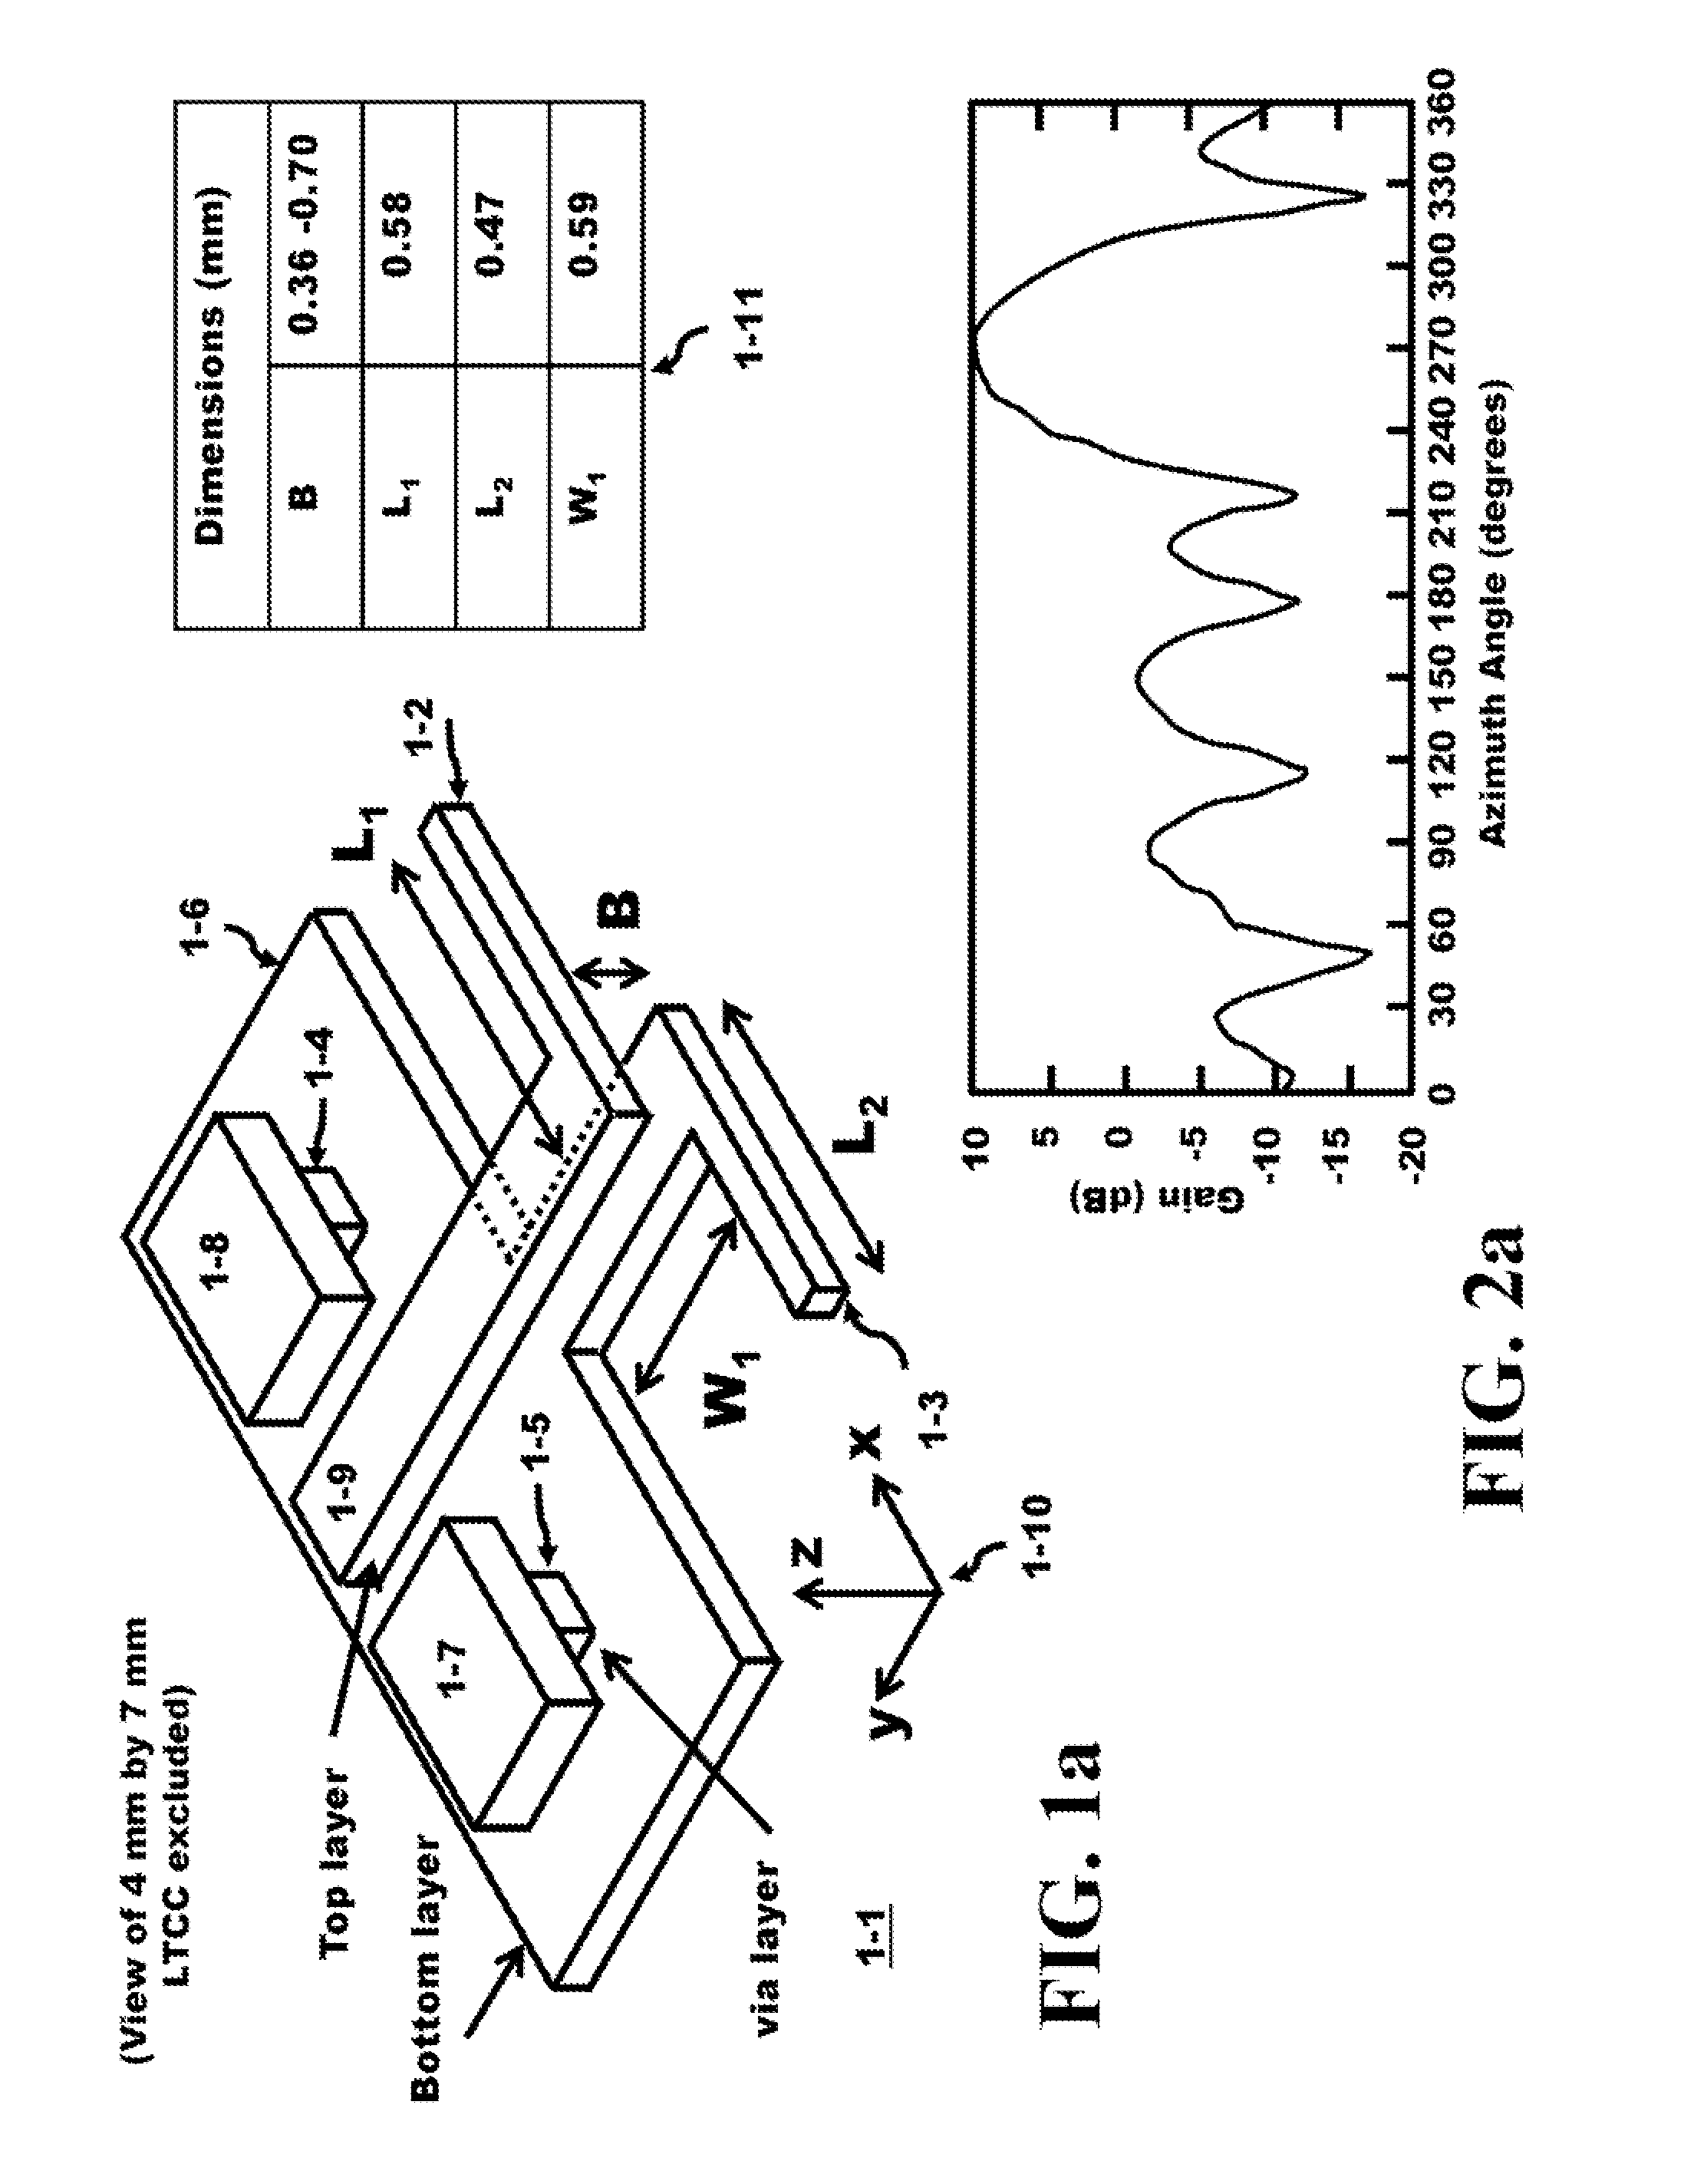 Method and Apparatus for the Alignment of a 60 GHz Endfire Antenna